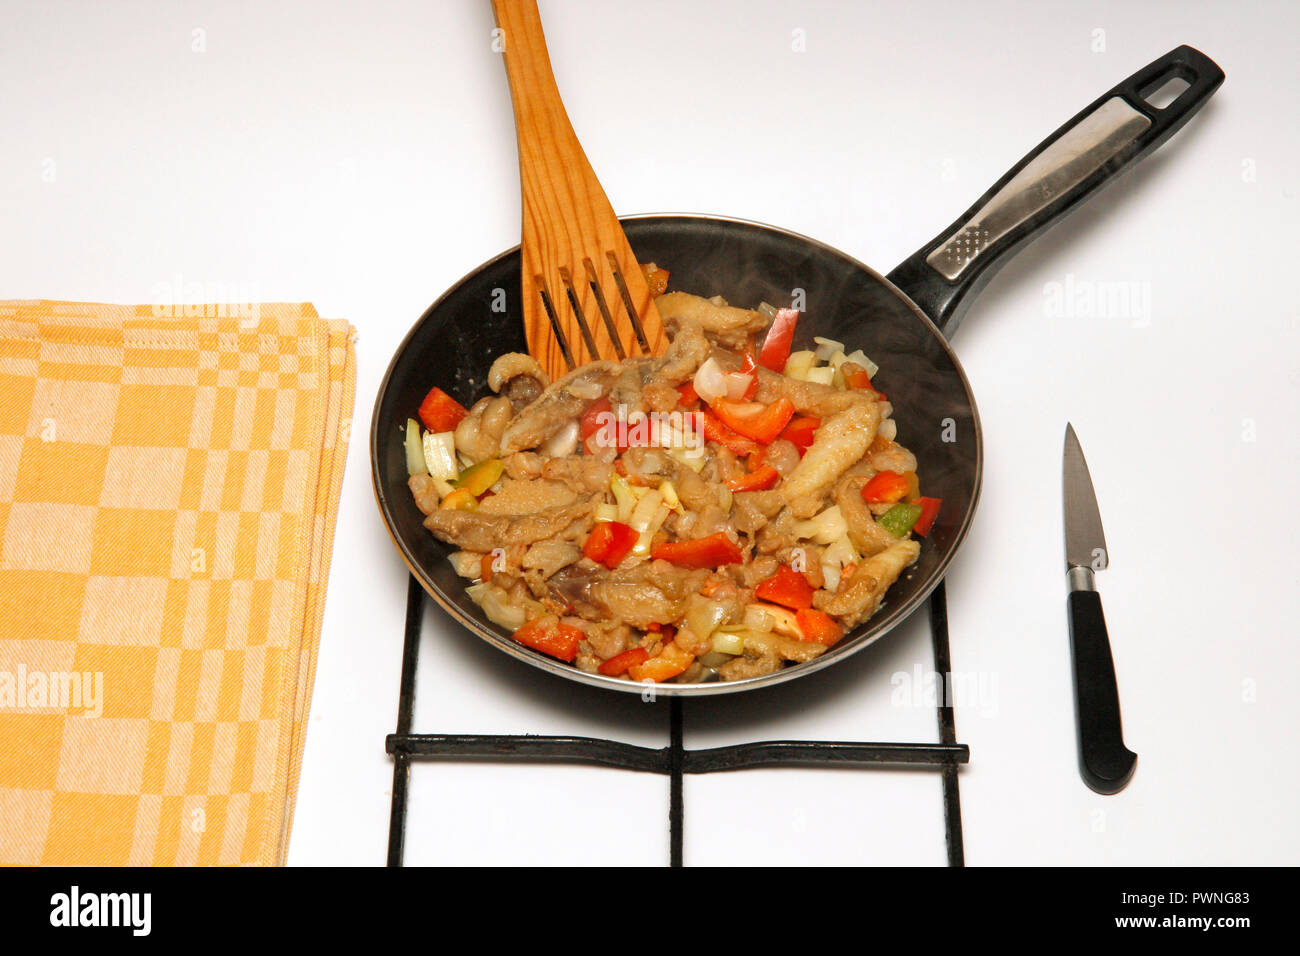 Pan with vegetables and seafood Stock Photo